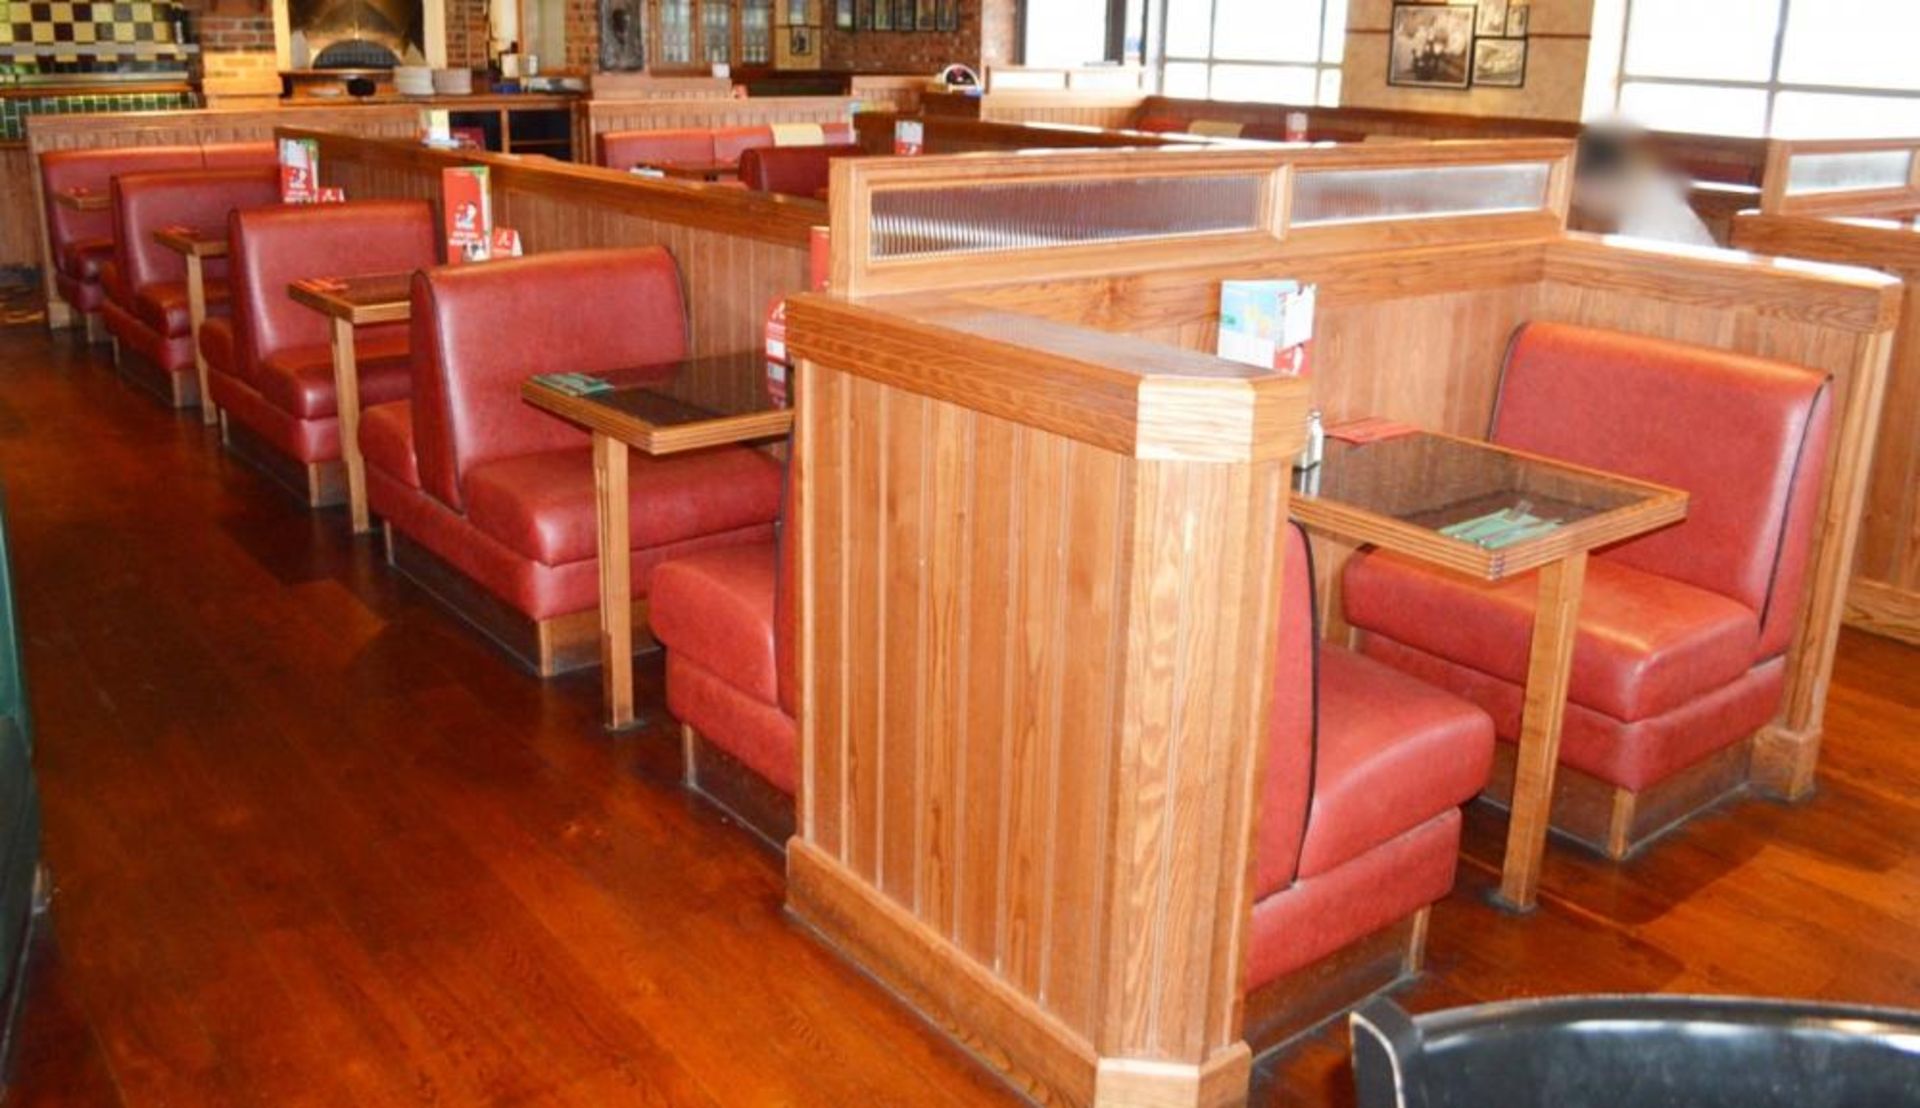 1 x Selection of Cosy Bespoke Seating Booths in a 1950's Retro American Diner Design With Dining Tab - Image 10 of 30